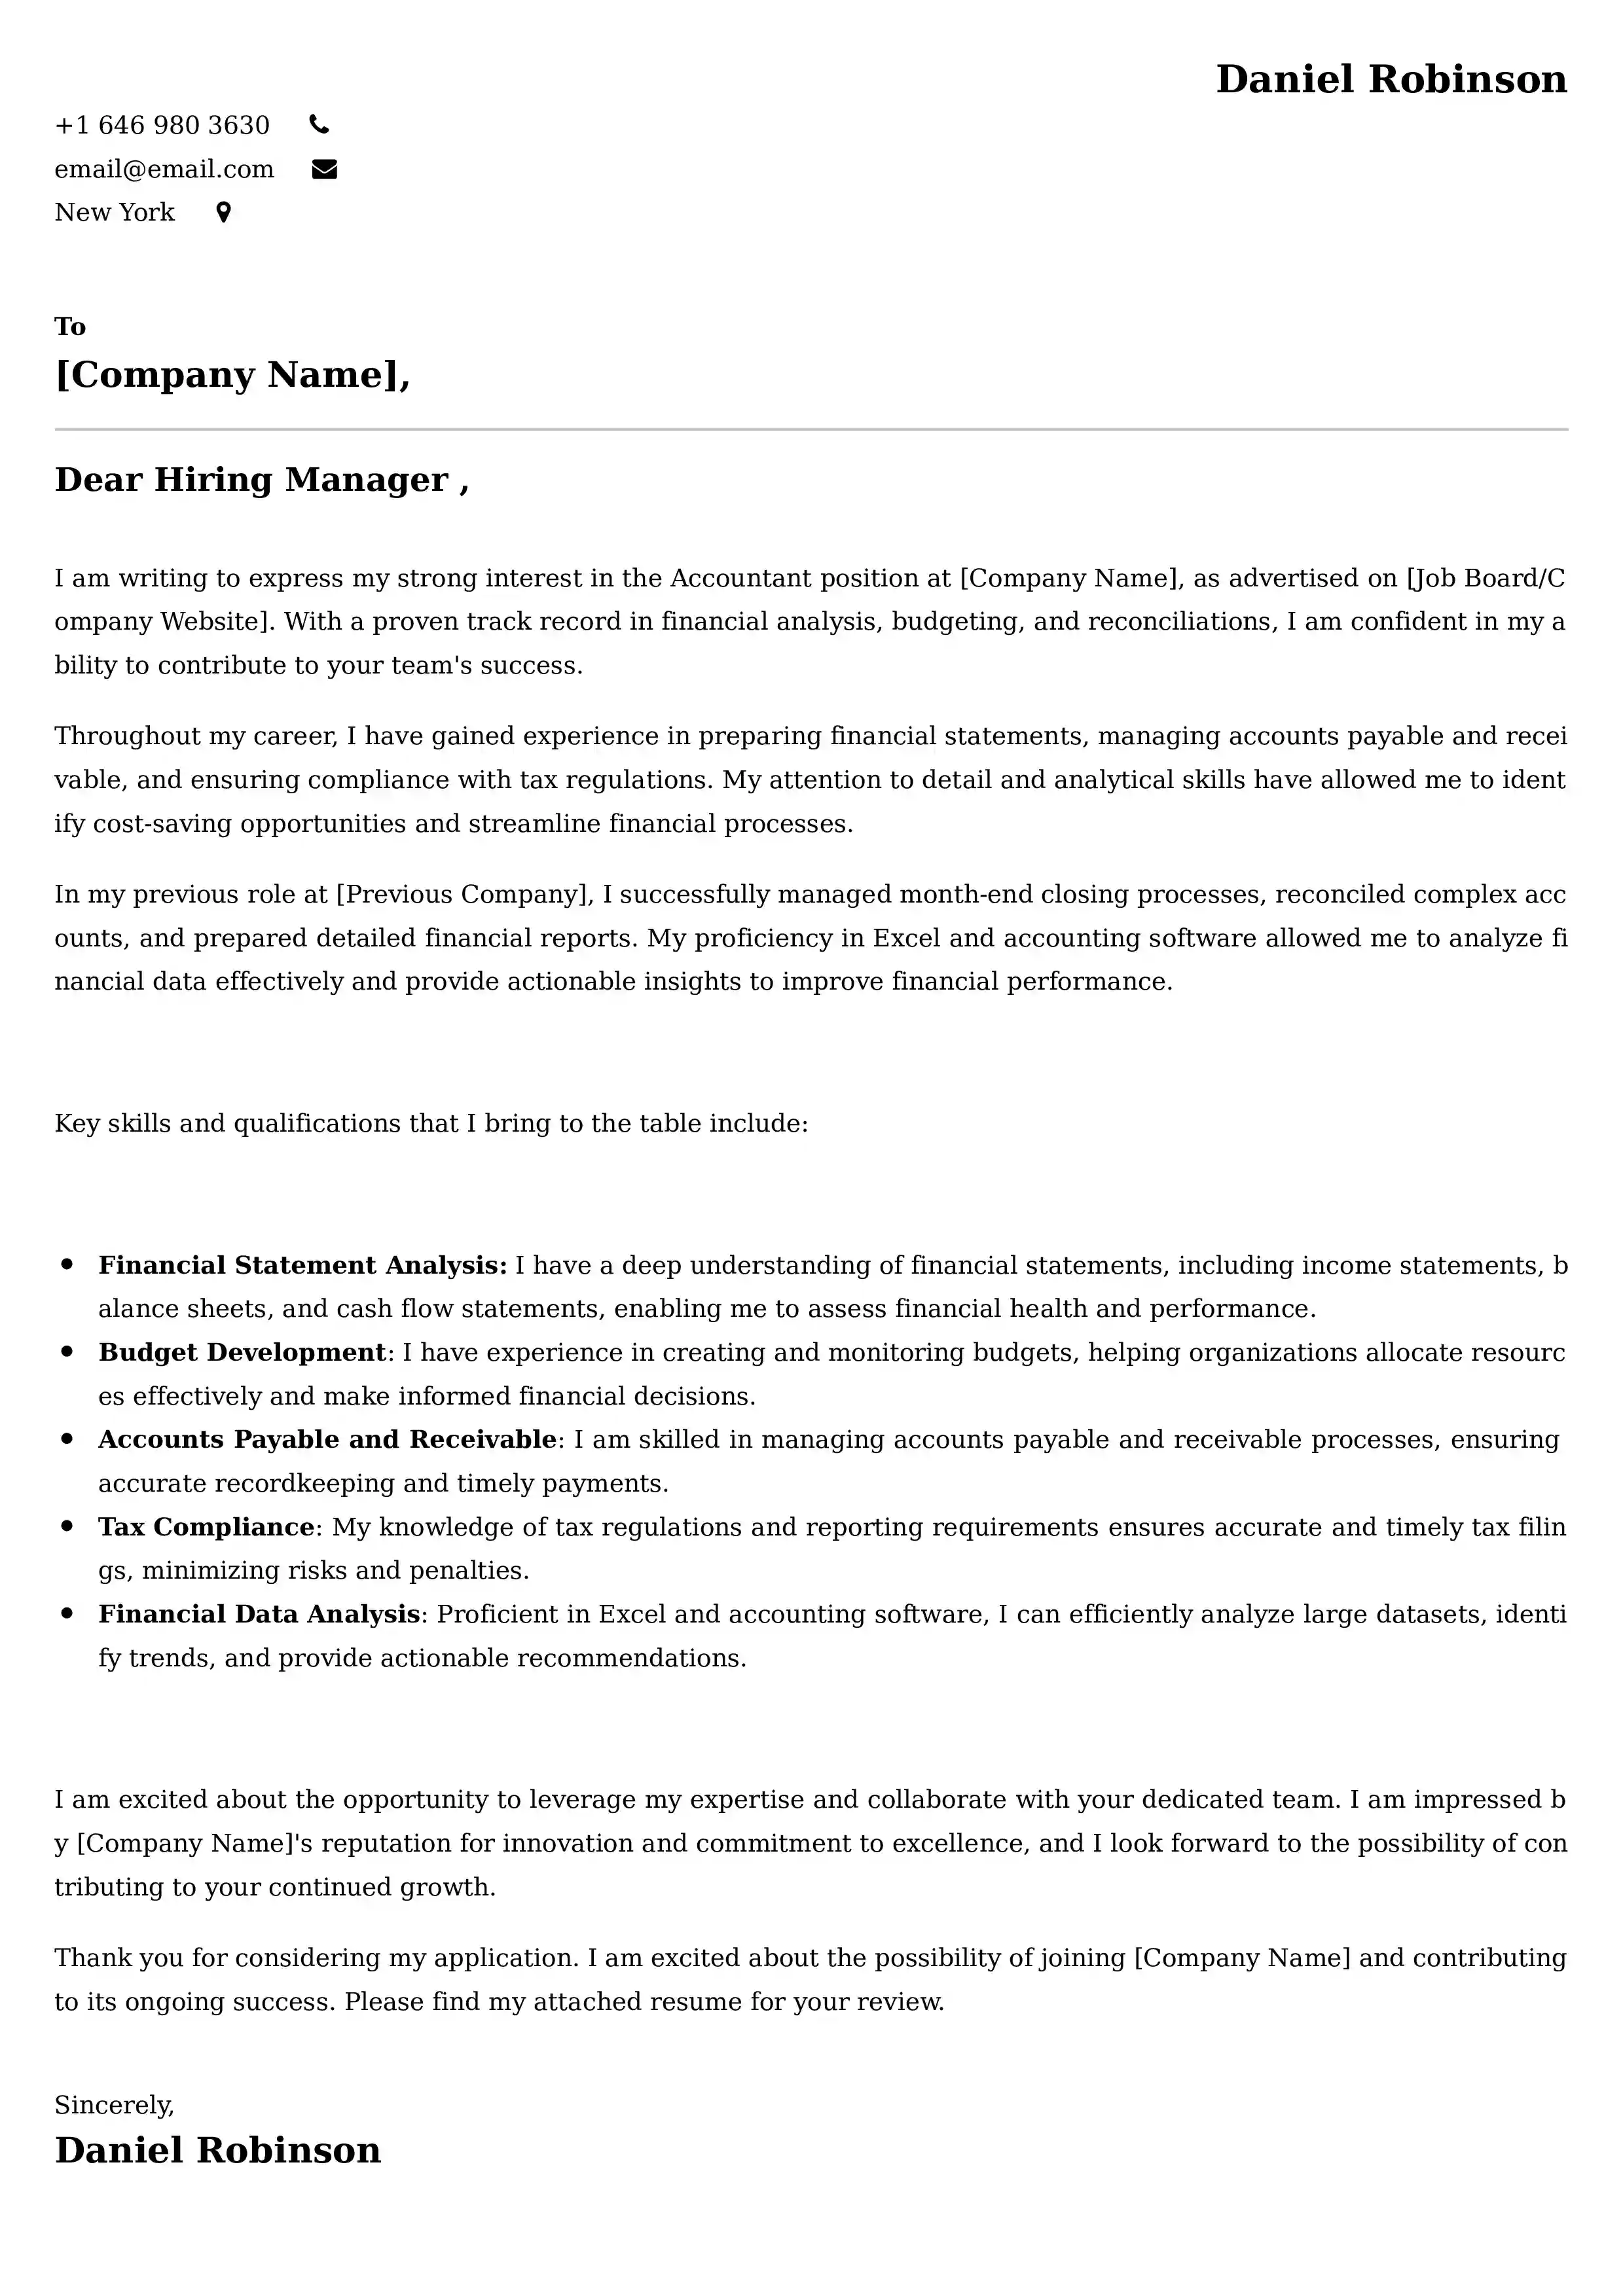 Accountant Cover Letter Examples - US Format and Tips